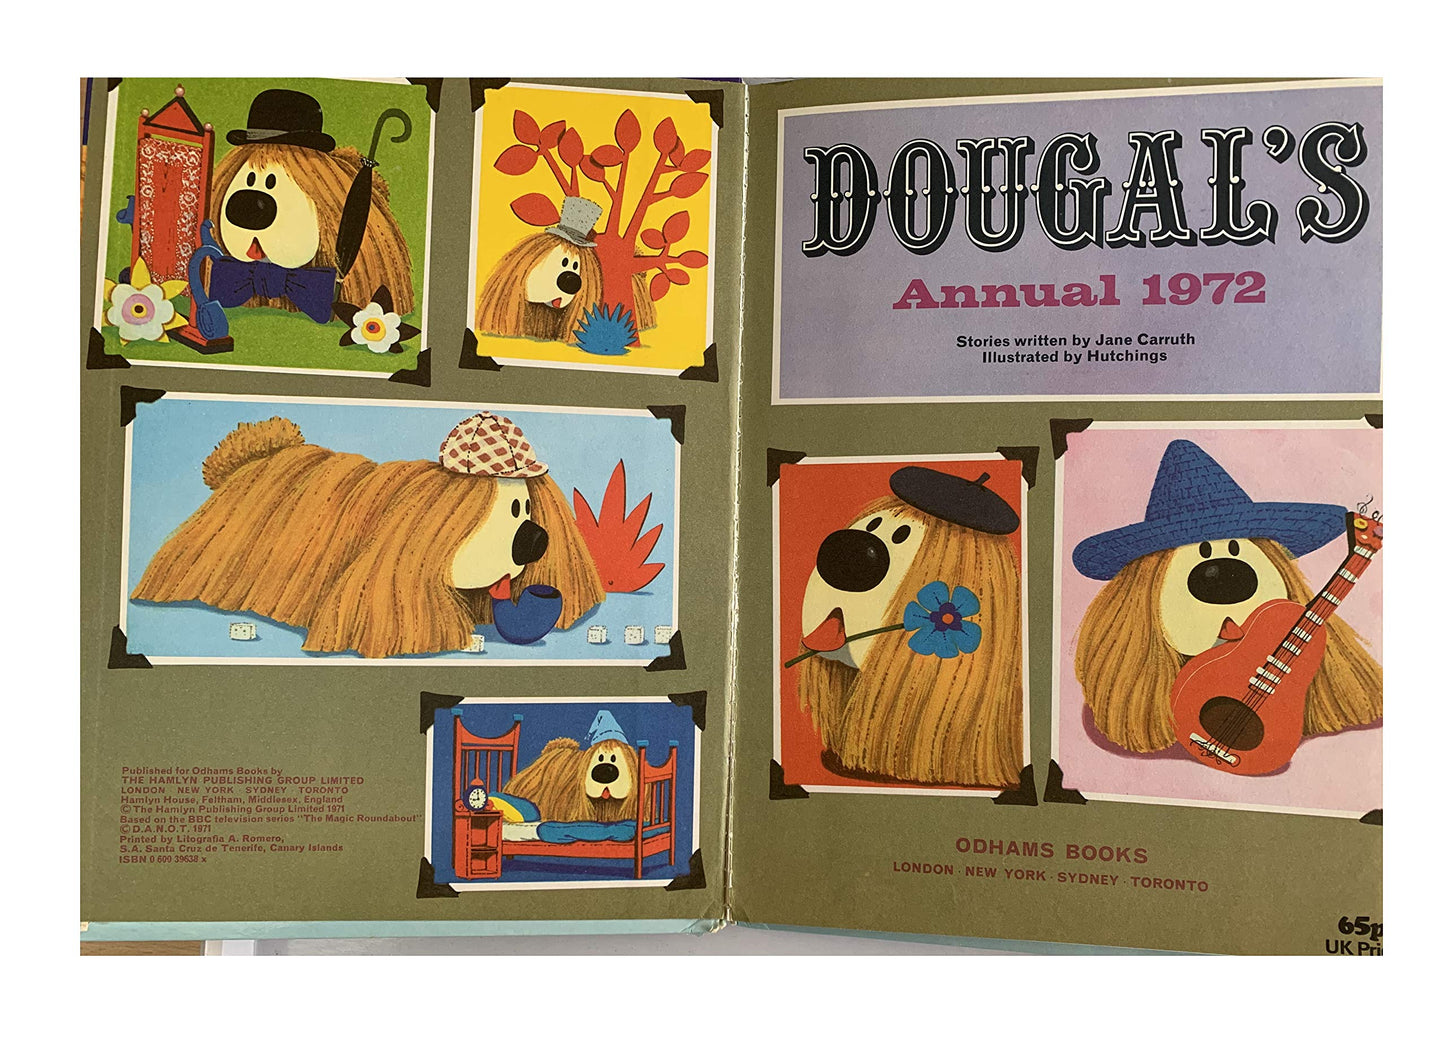 Vintage The Magic Roundabout Dougals Annual 1972